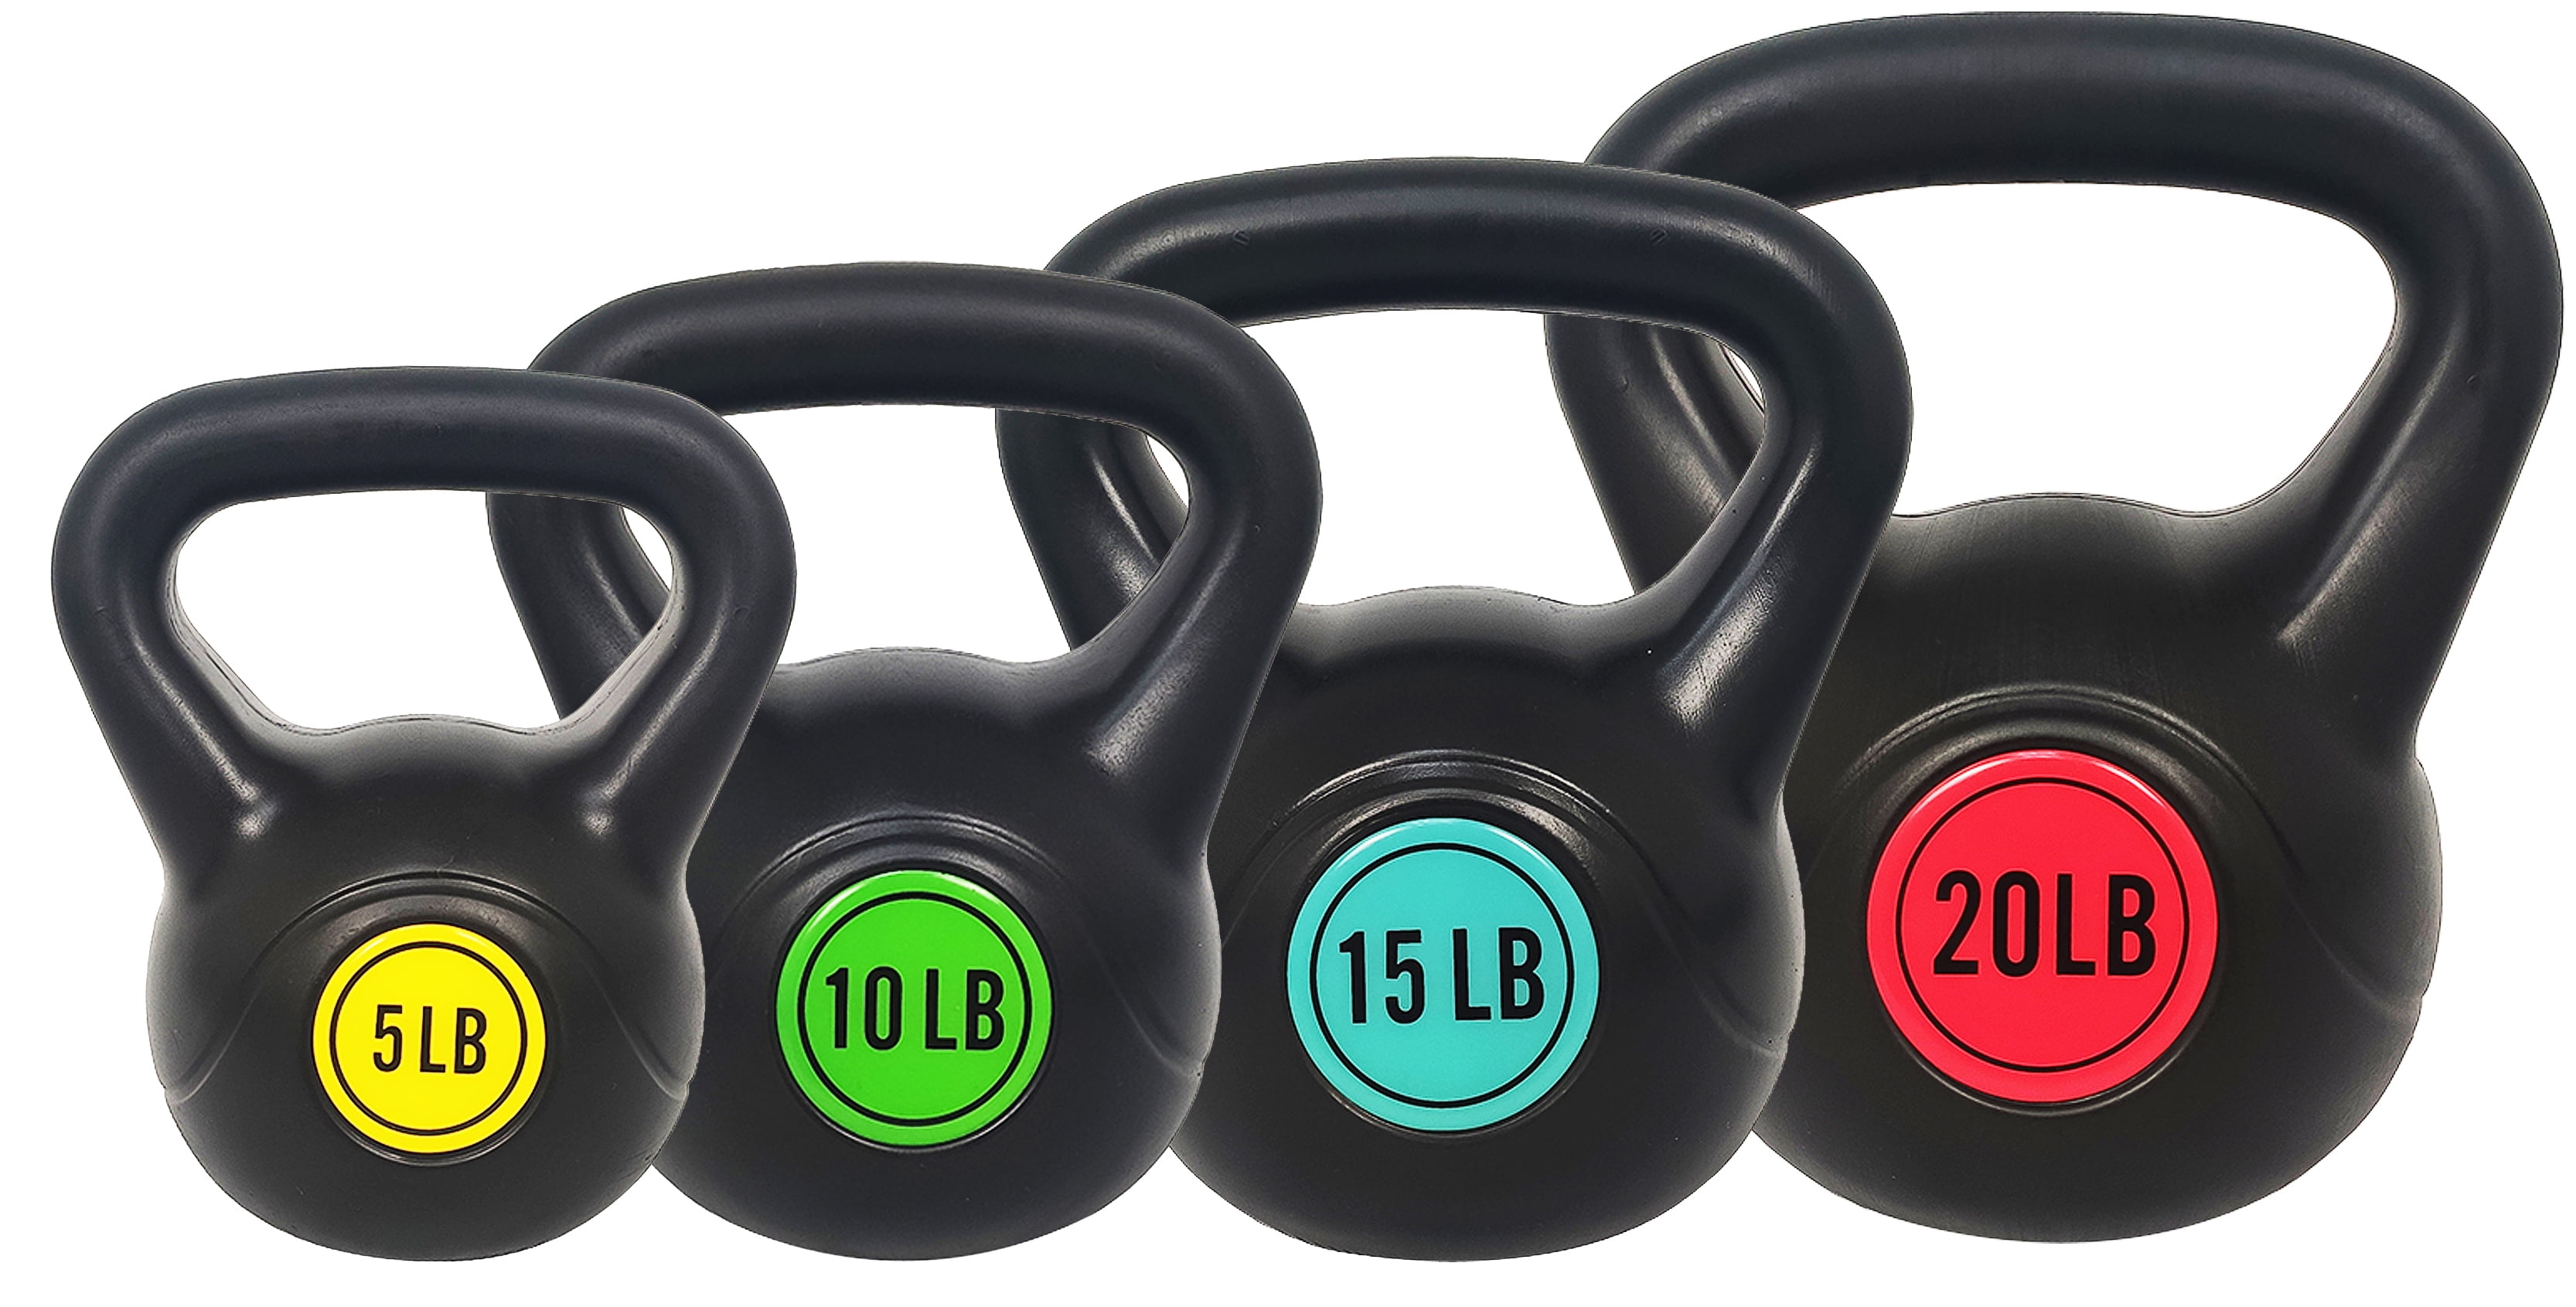 Lbs., 3-Piece Lbs., Fitness Lbs. Kettlebell Weight Grip BalanceFrom Exercise 15 20 Wide Include 10 Set,